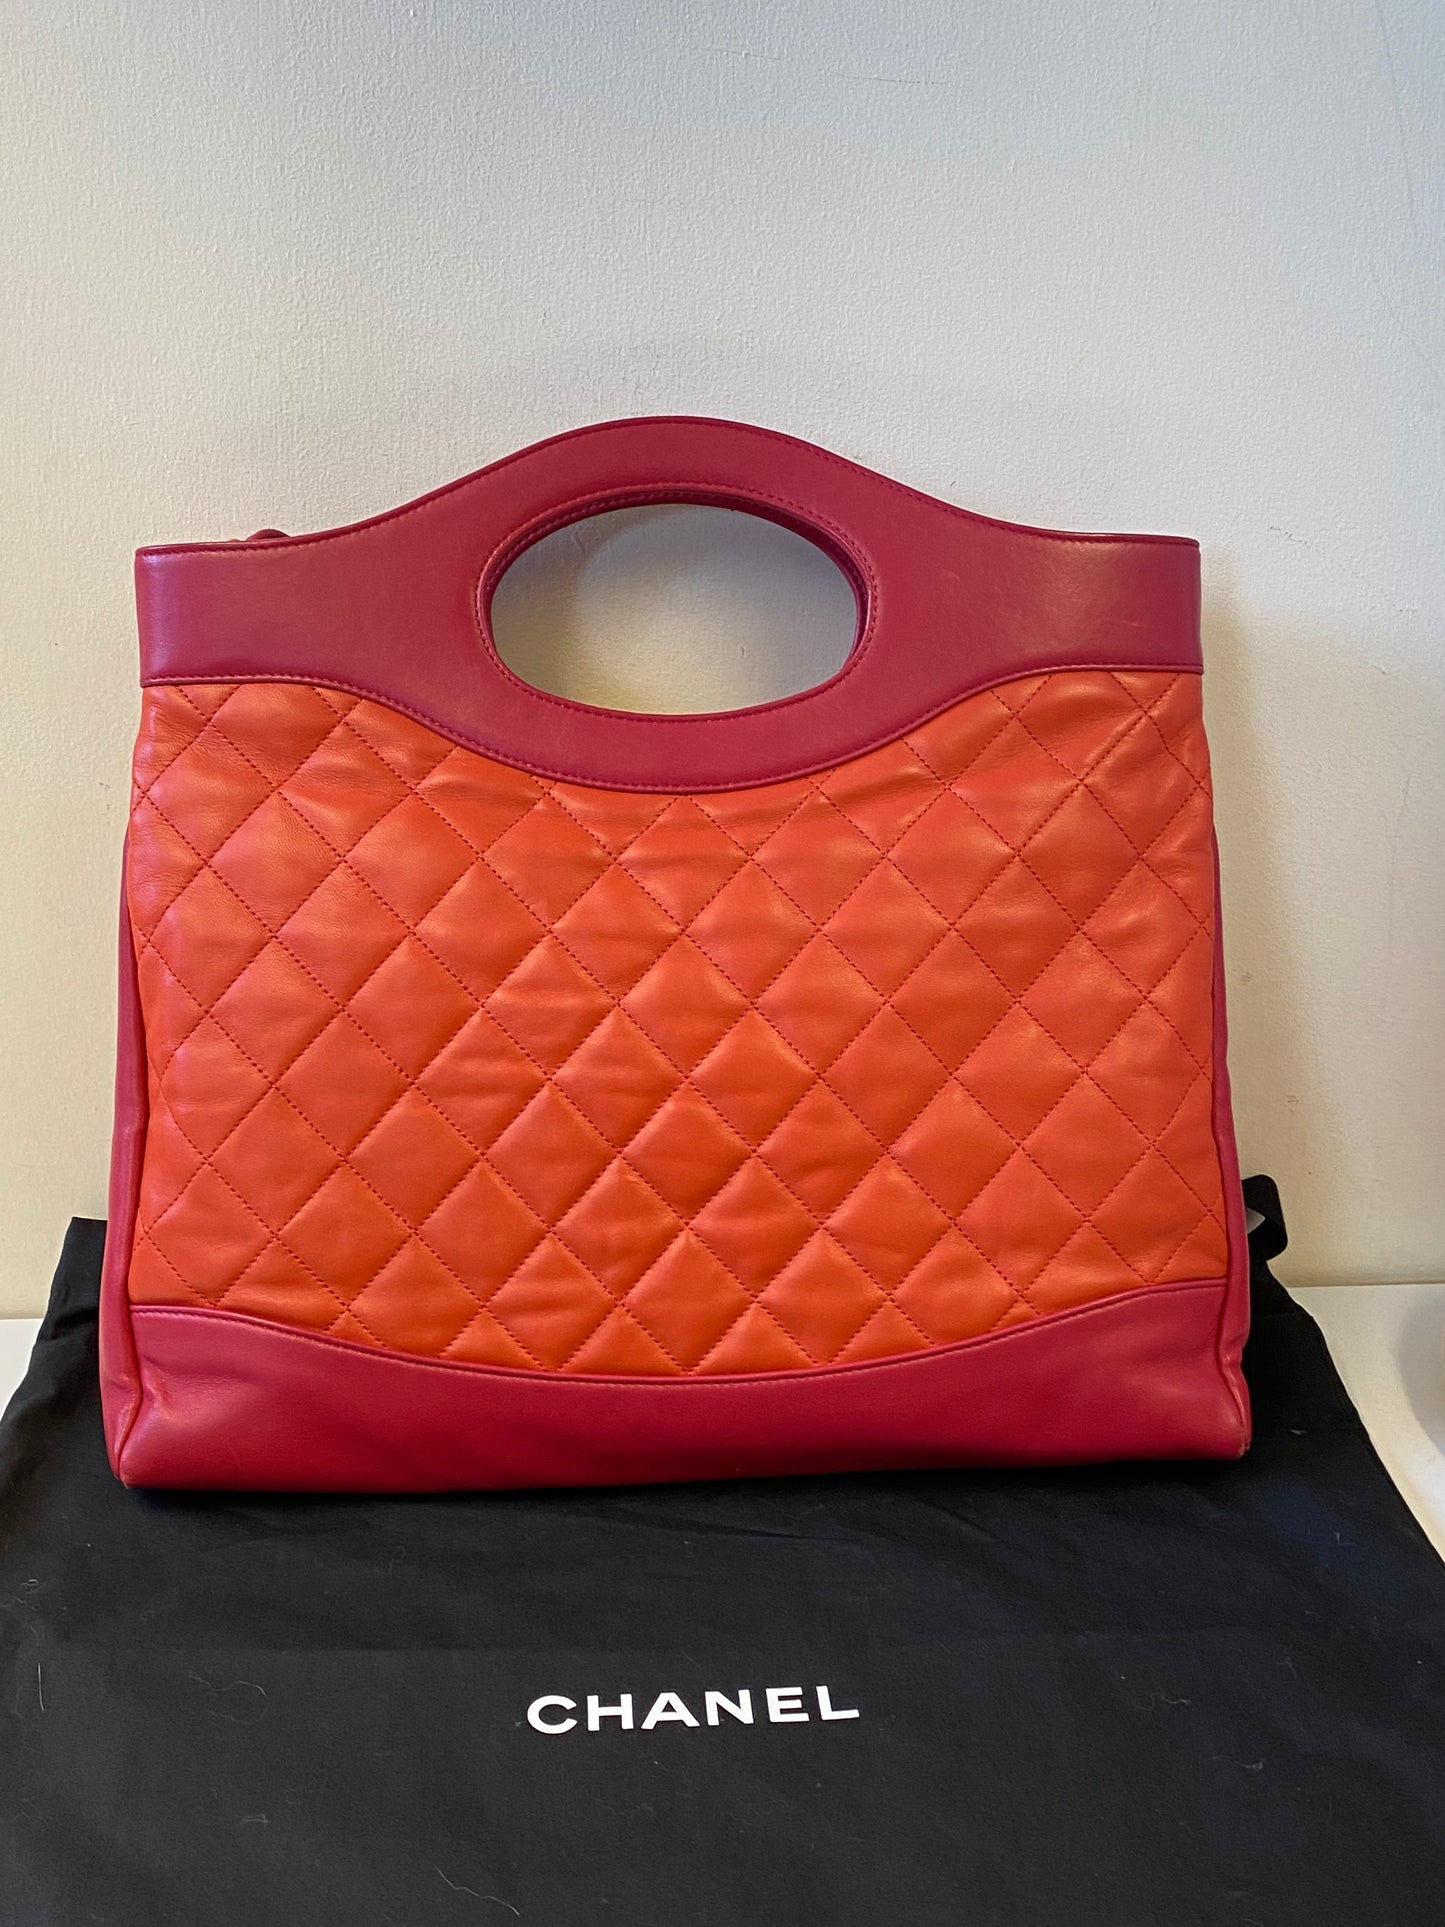 Chanel Orange & Pink Lambskin leather Chanel 31 Shopping Tote Bag